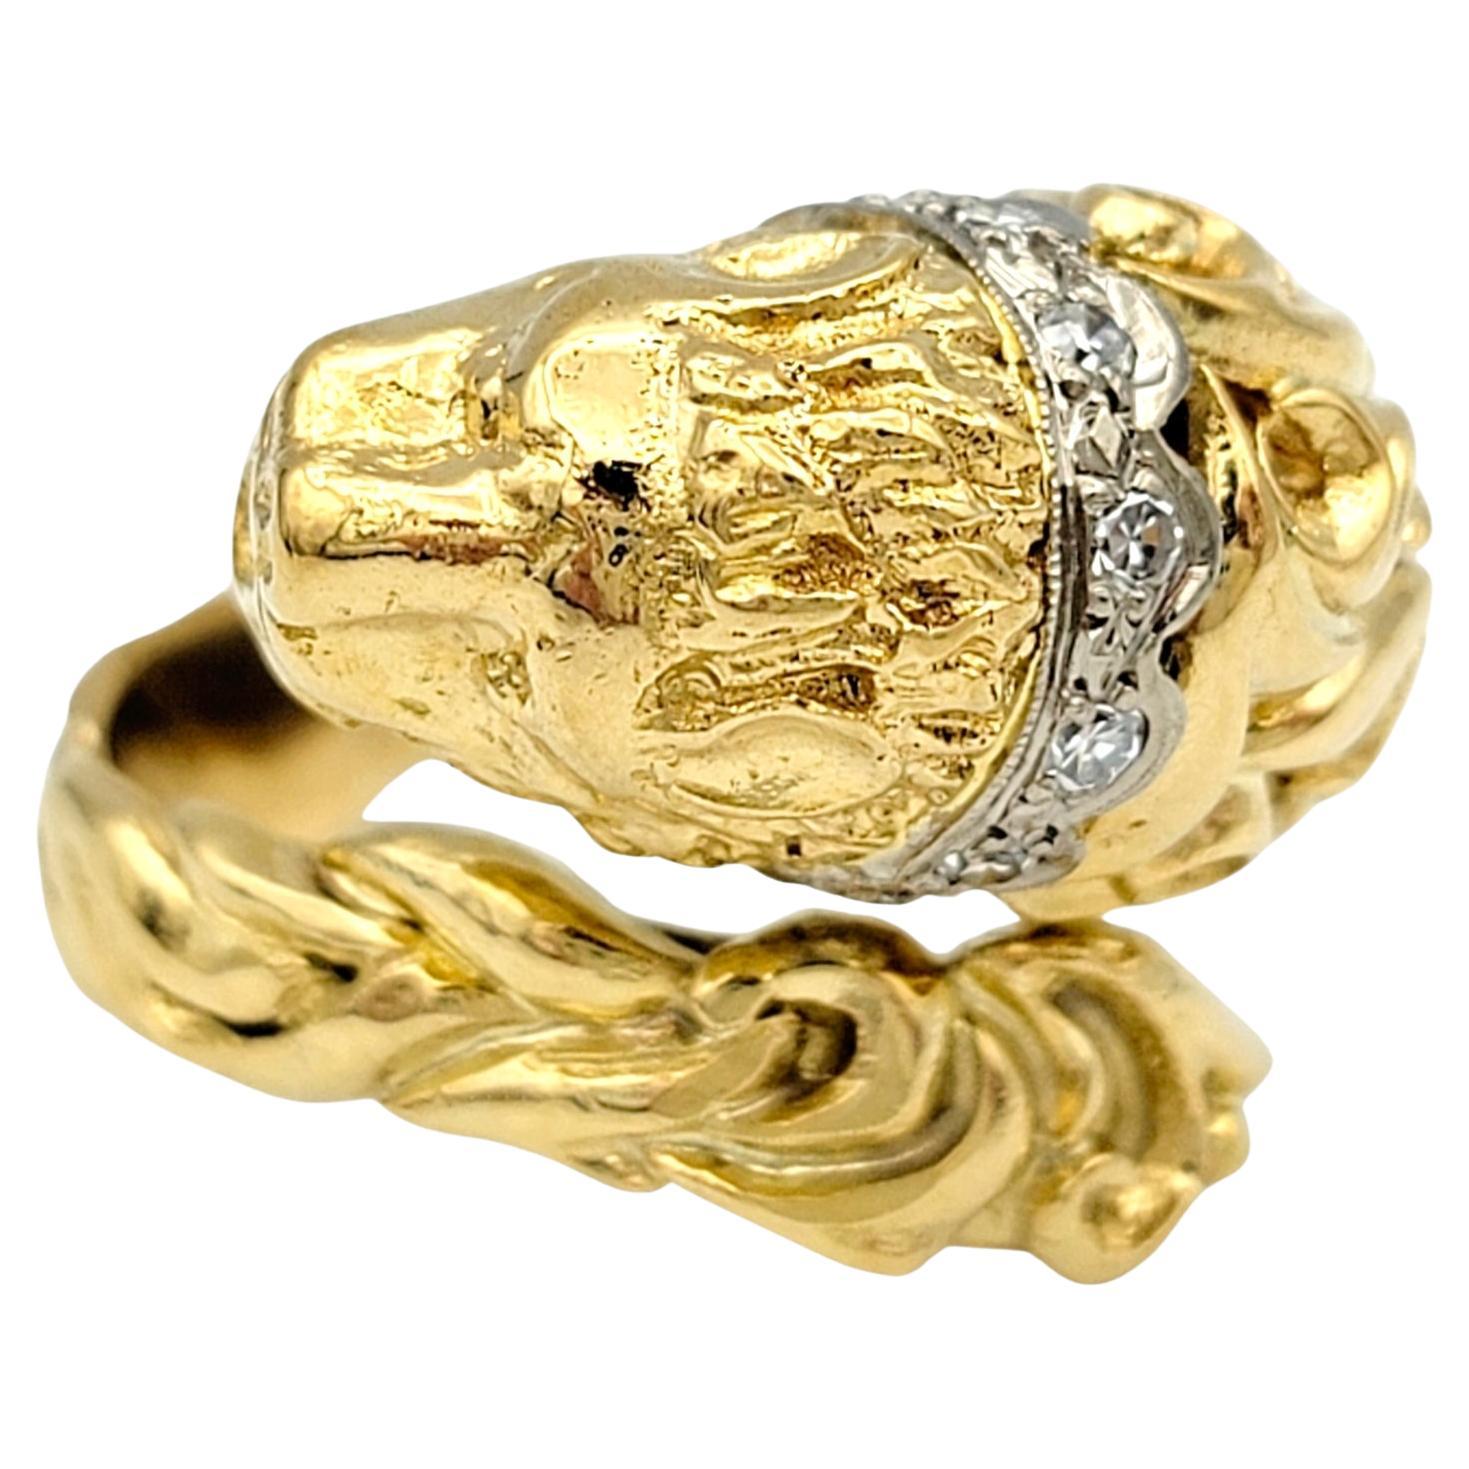 Lion Bypass Style Ring with Diamond Collar Set in 14 Karat Yellow and White Gold